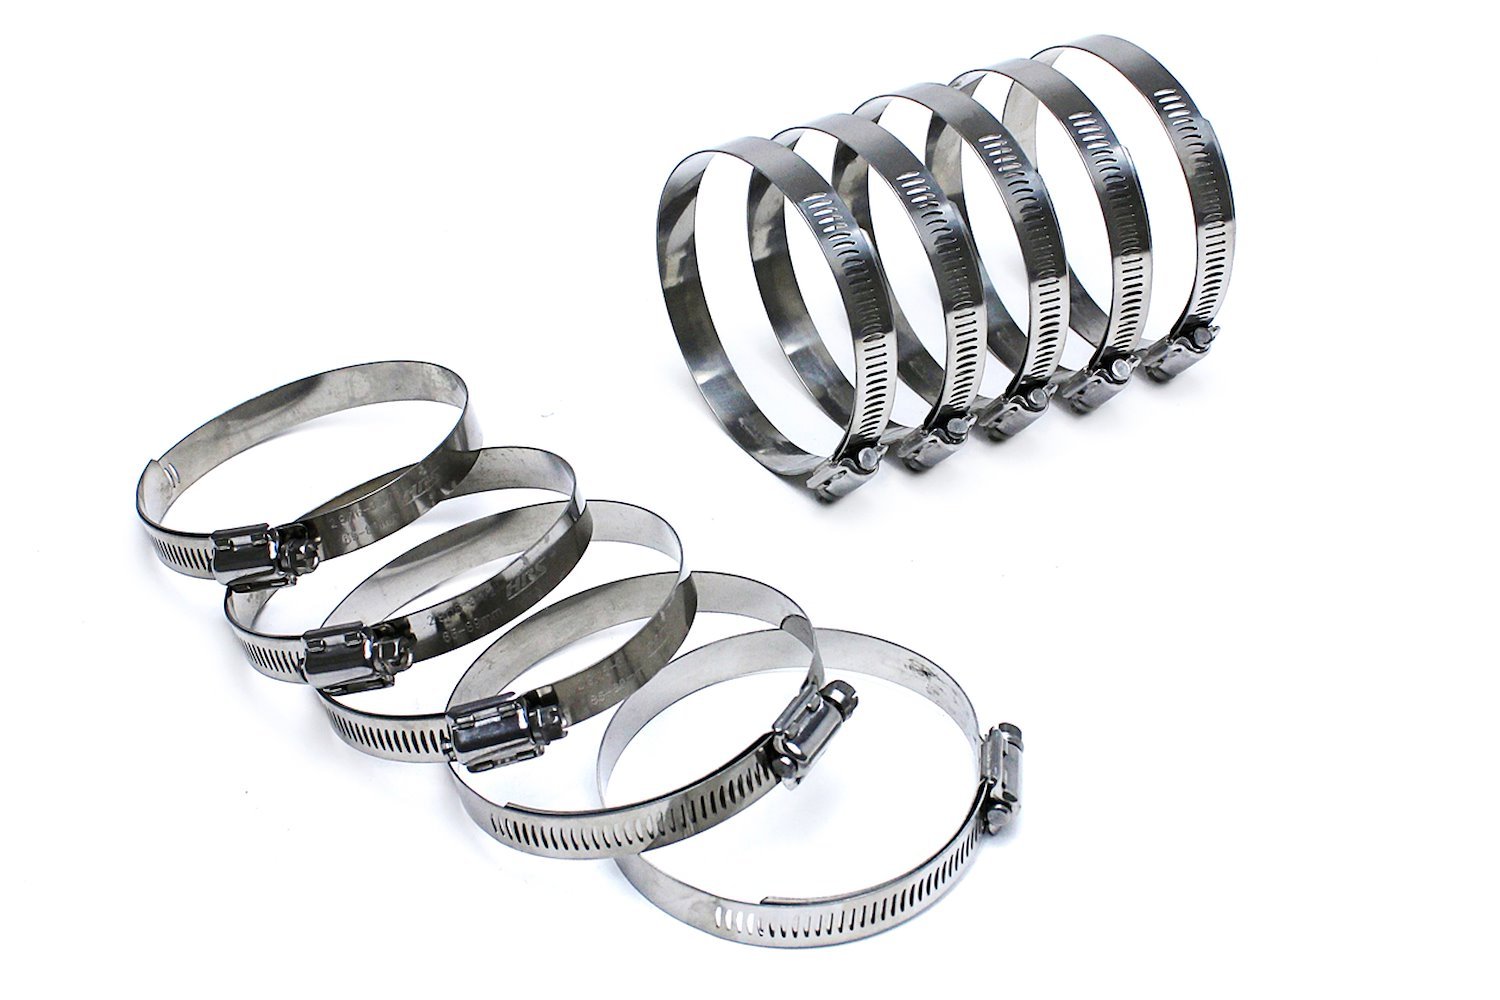 SSWC-33-57x10 Stainless Steel Worm Gear Hose Clamp, Effective Range: 1-5/16 in.- 2-1/4 in., 10Pc